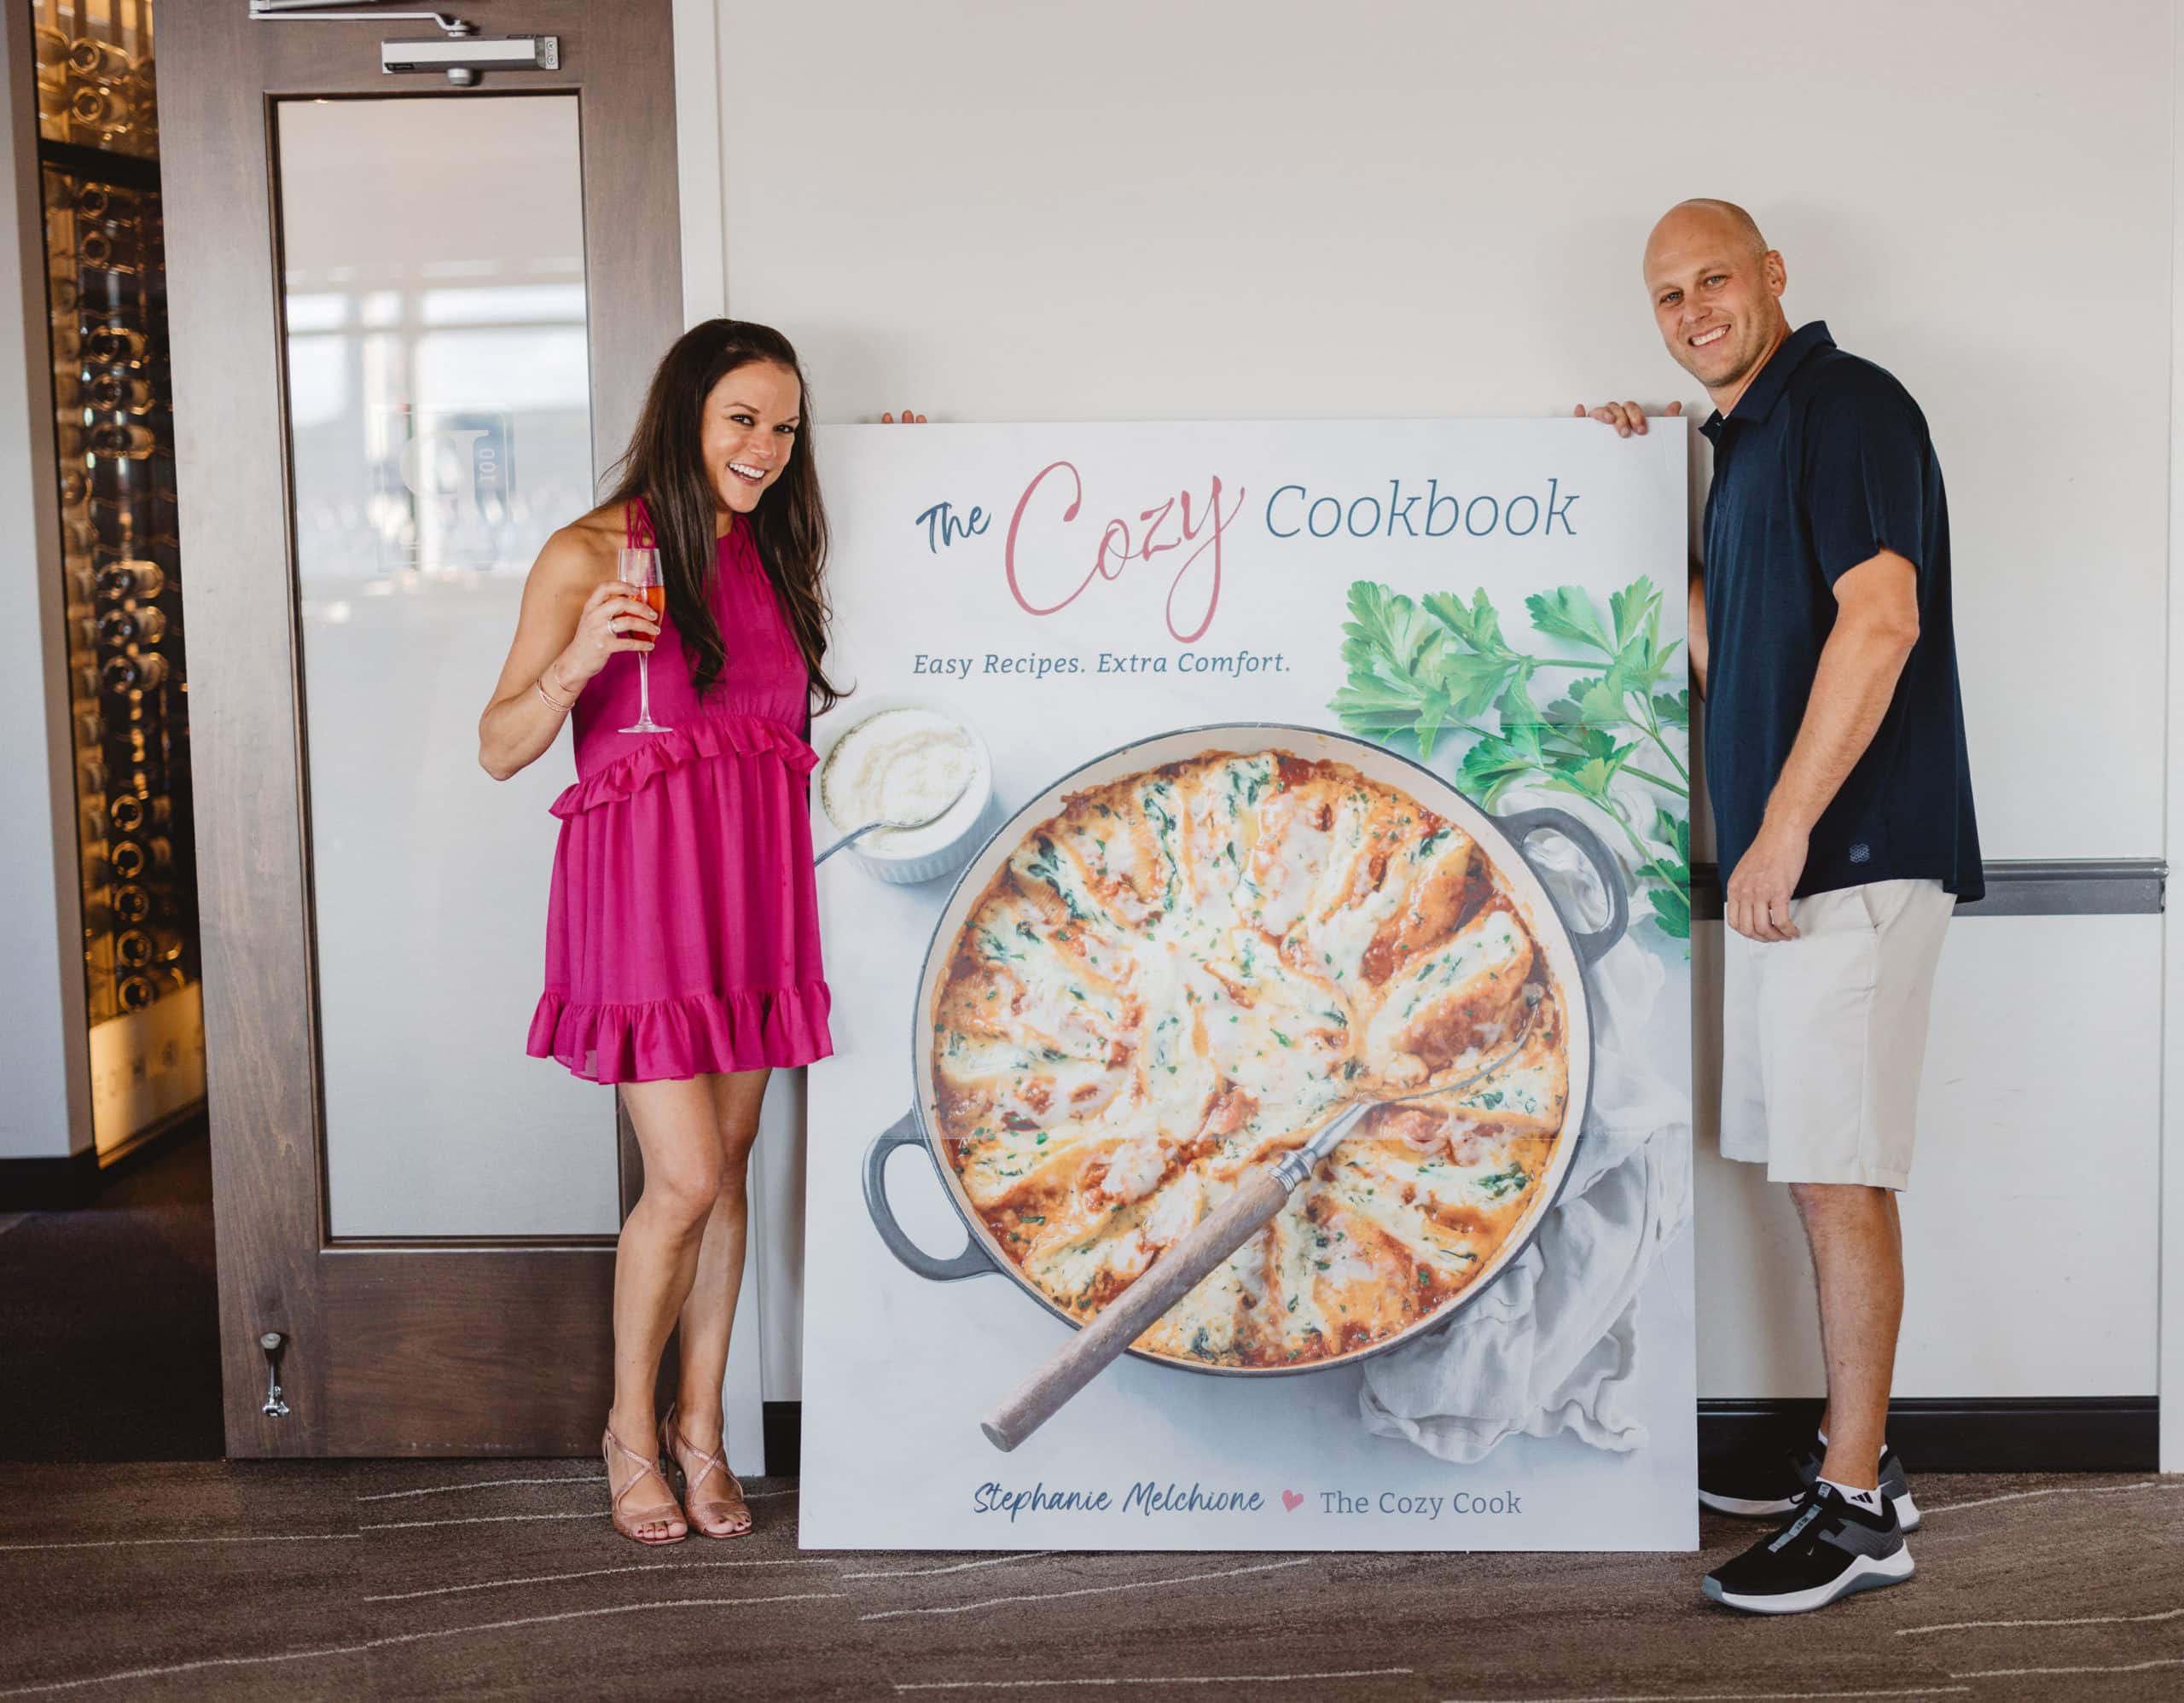 Two people standing next to a giant cover of The Cozy Cookbook.